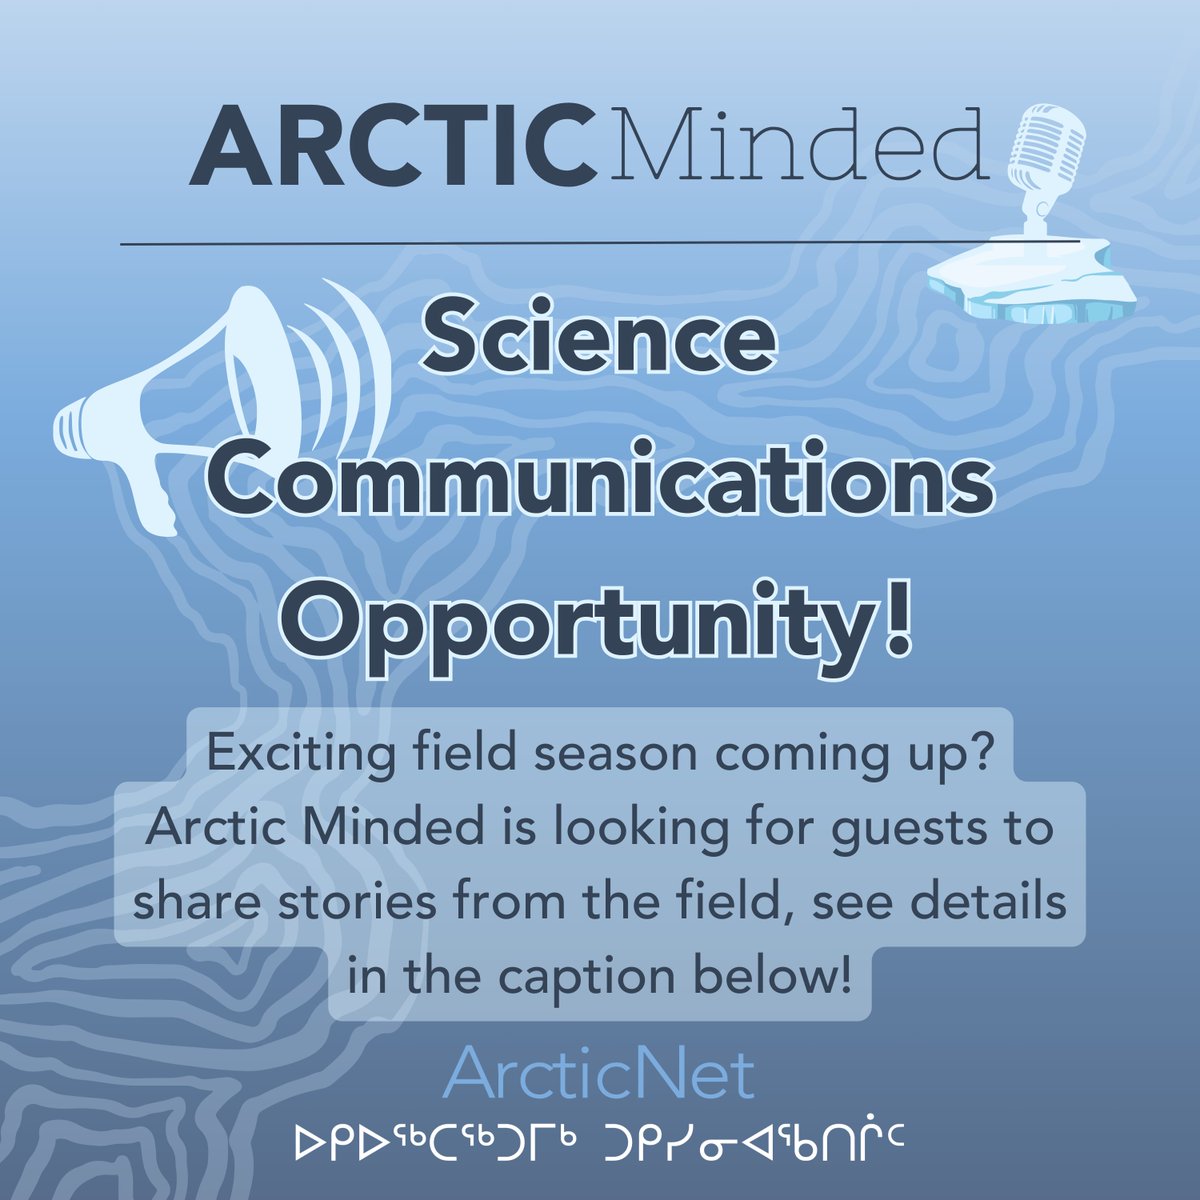 Calling all Northern researchers! The Arctic Minded podcast is recruiting volunteers for a series of special mini-sodes depicting stories from the field. Interested? Contact Julia Macpherson to learn more (jmacphe2@uottawa.ca).